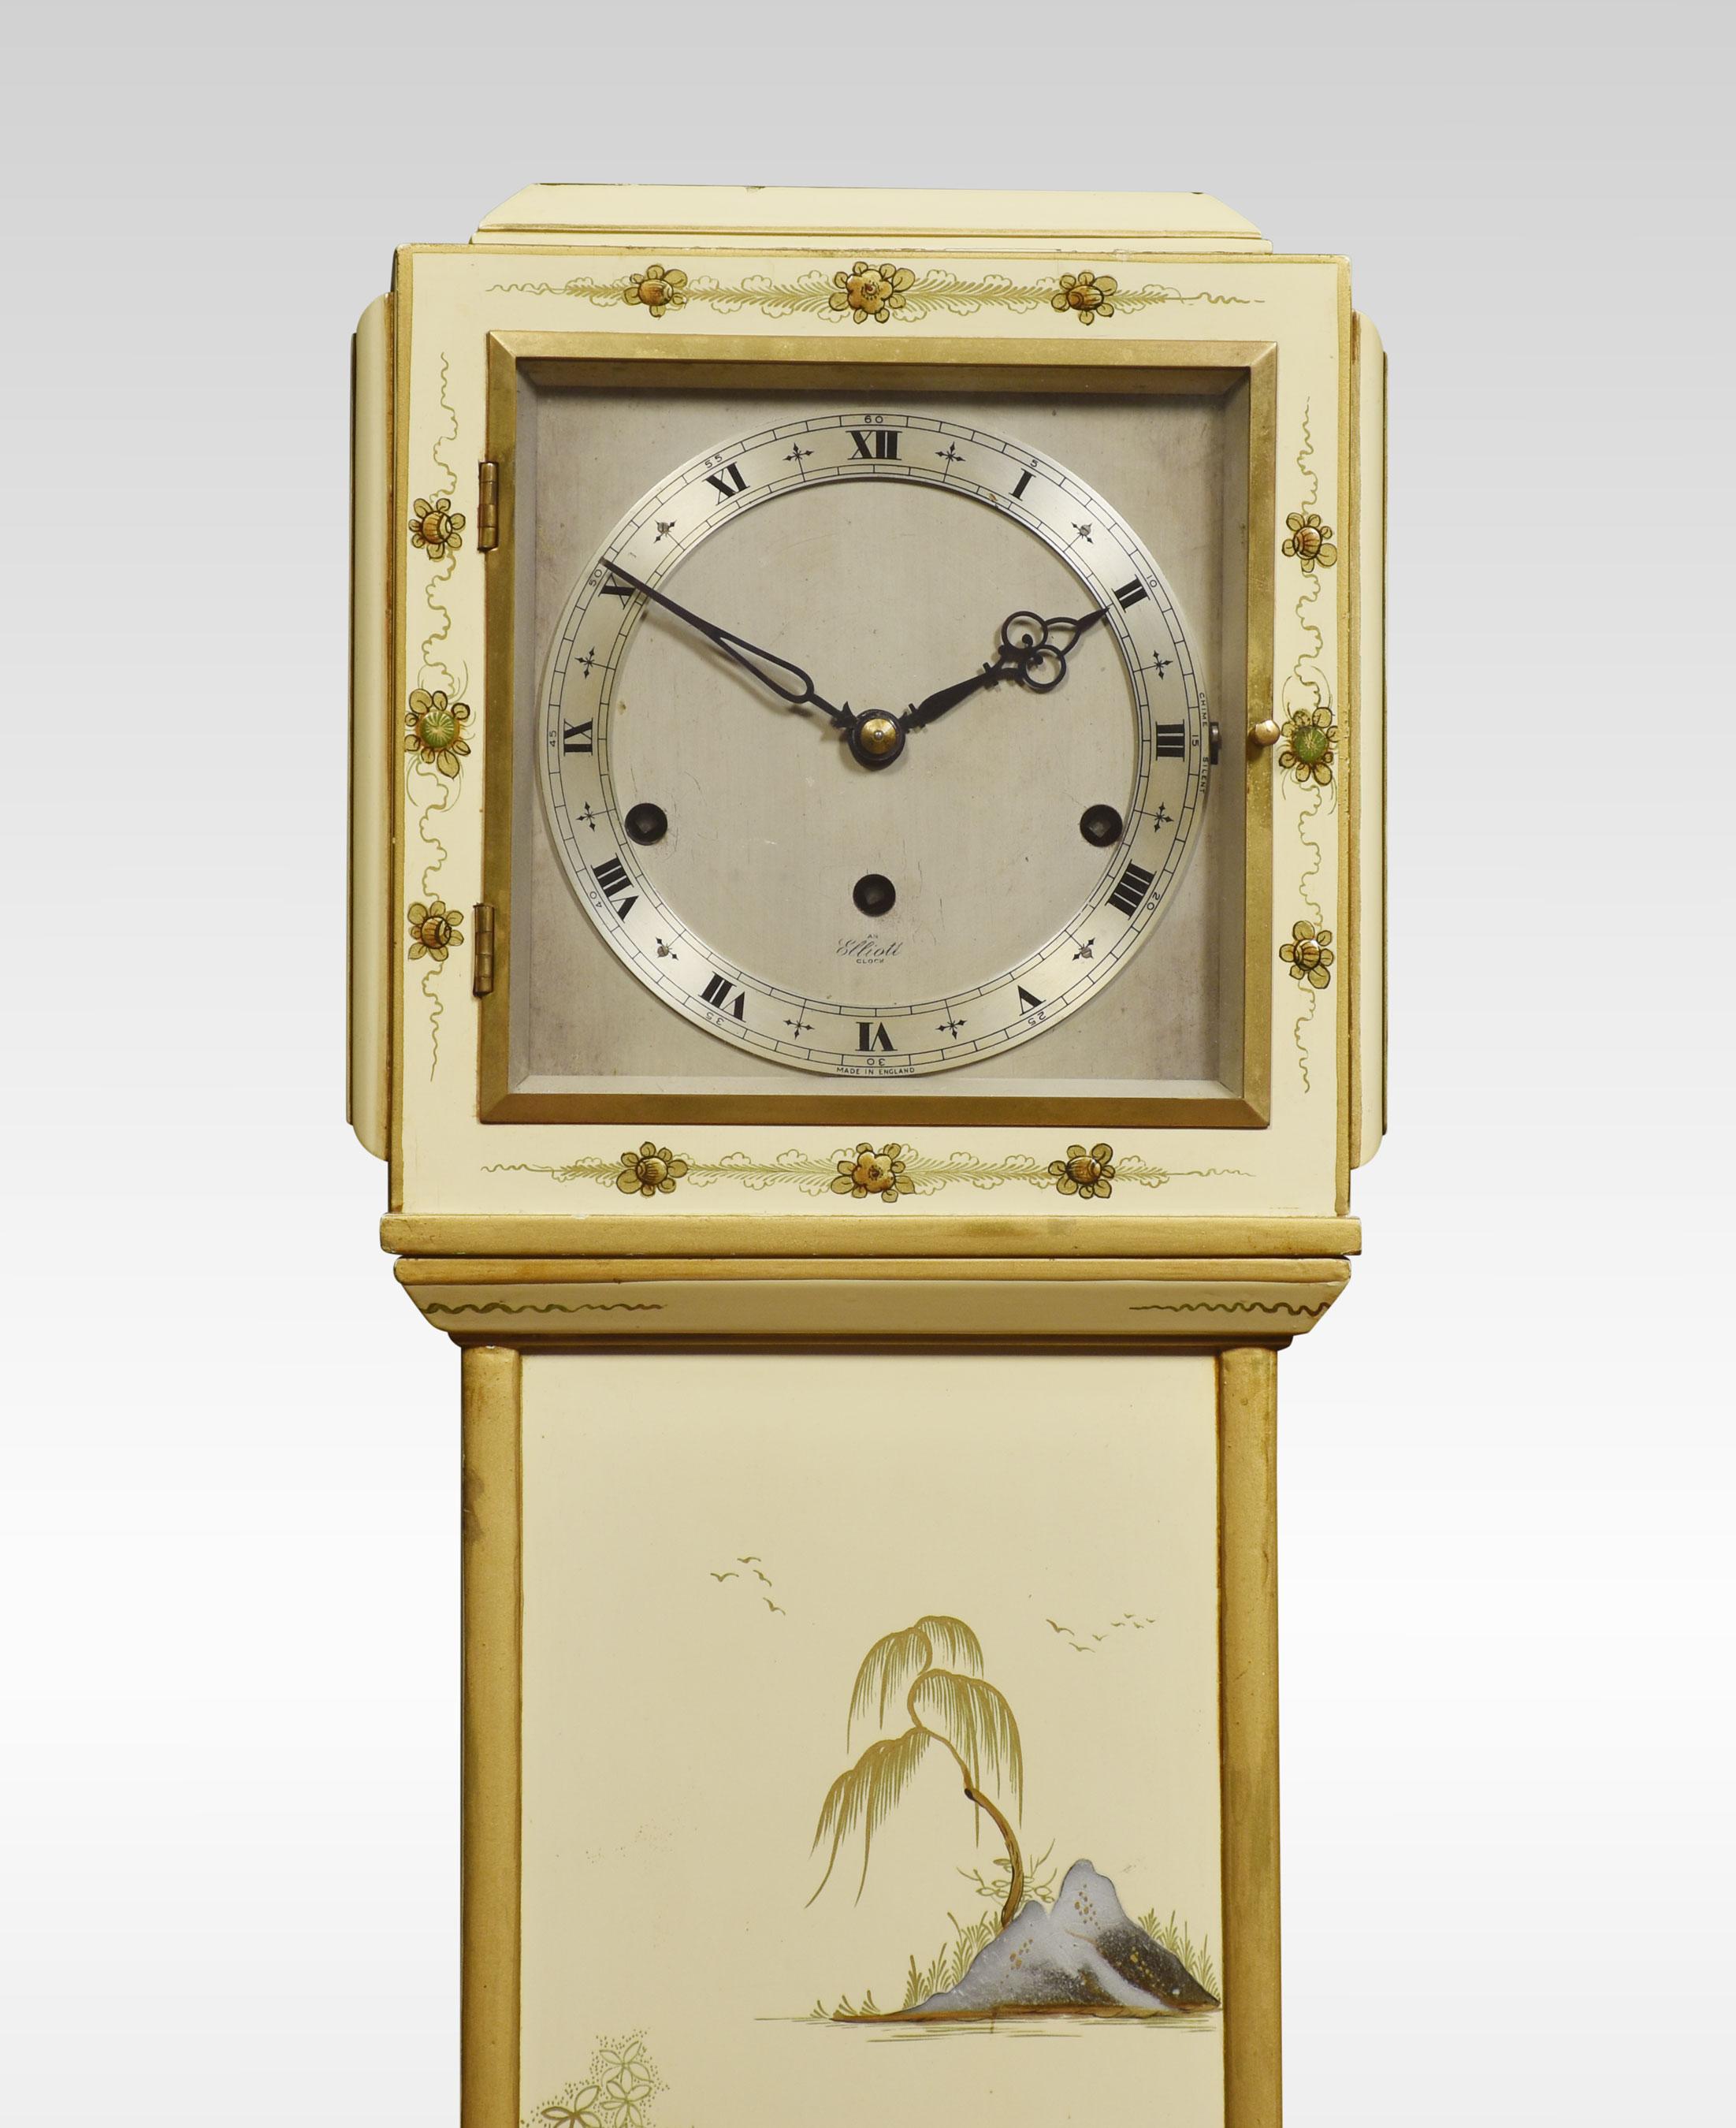 Cream japanned grandmother clock, Elliott London. The eight-day movement striking on gongs to the silvered dial with roman numerals. Enclosed in cream lacquered japanned case finish with gold detailing decorated with hand-painted oriental scenes and